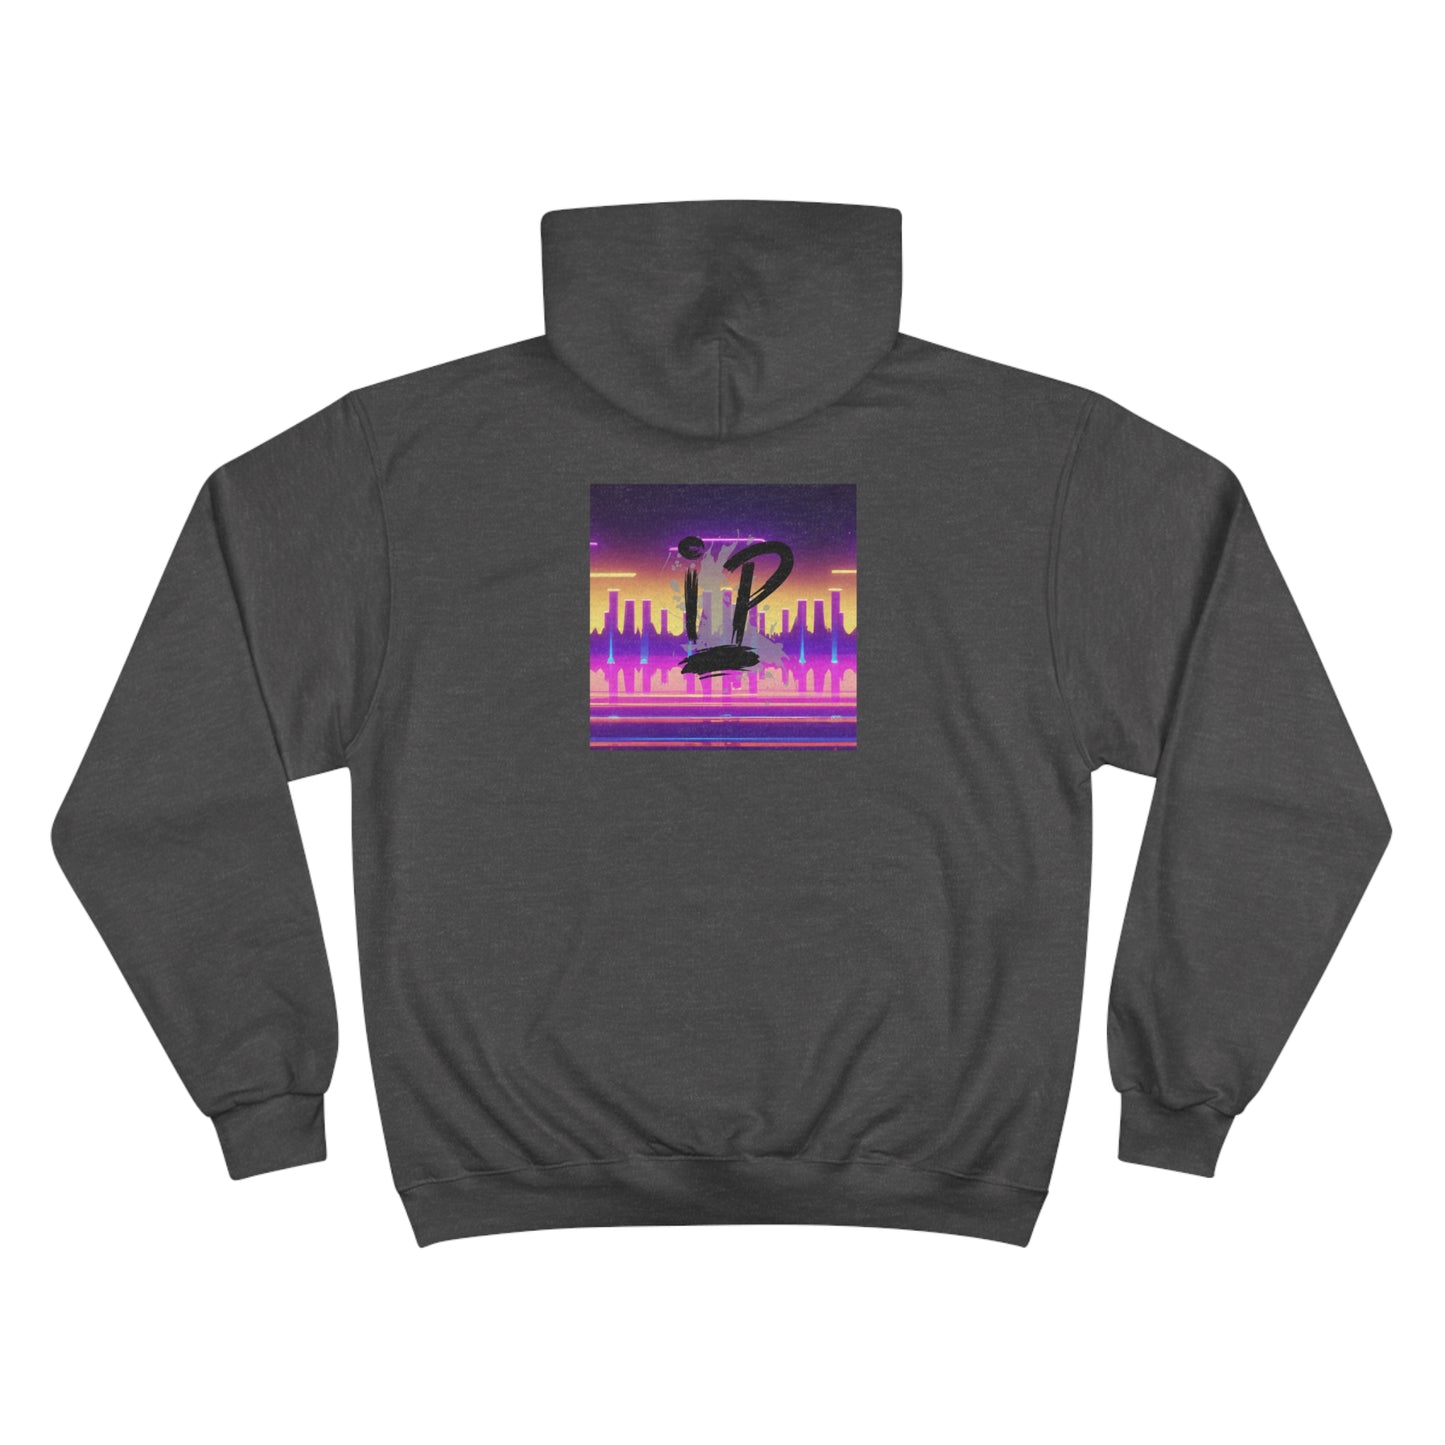 Urban Soul Couture - Hoodie